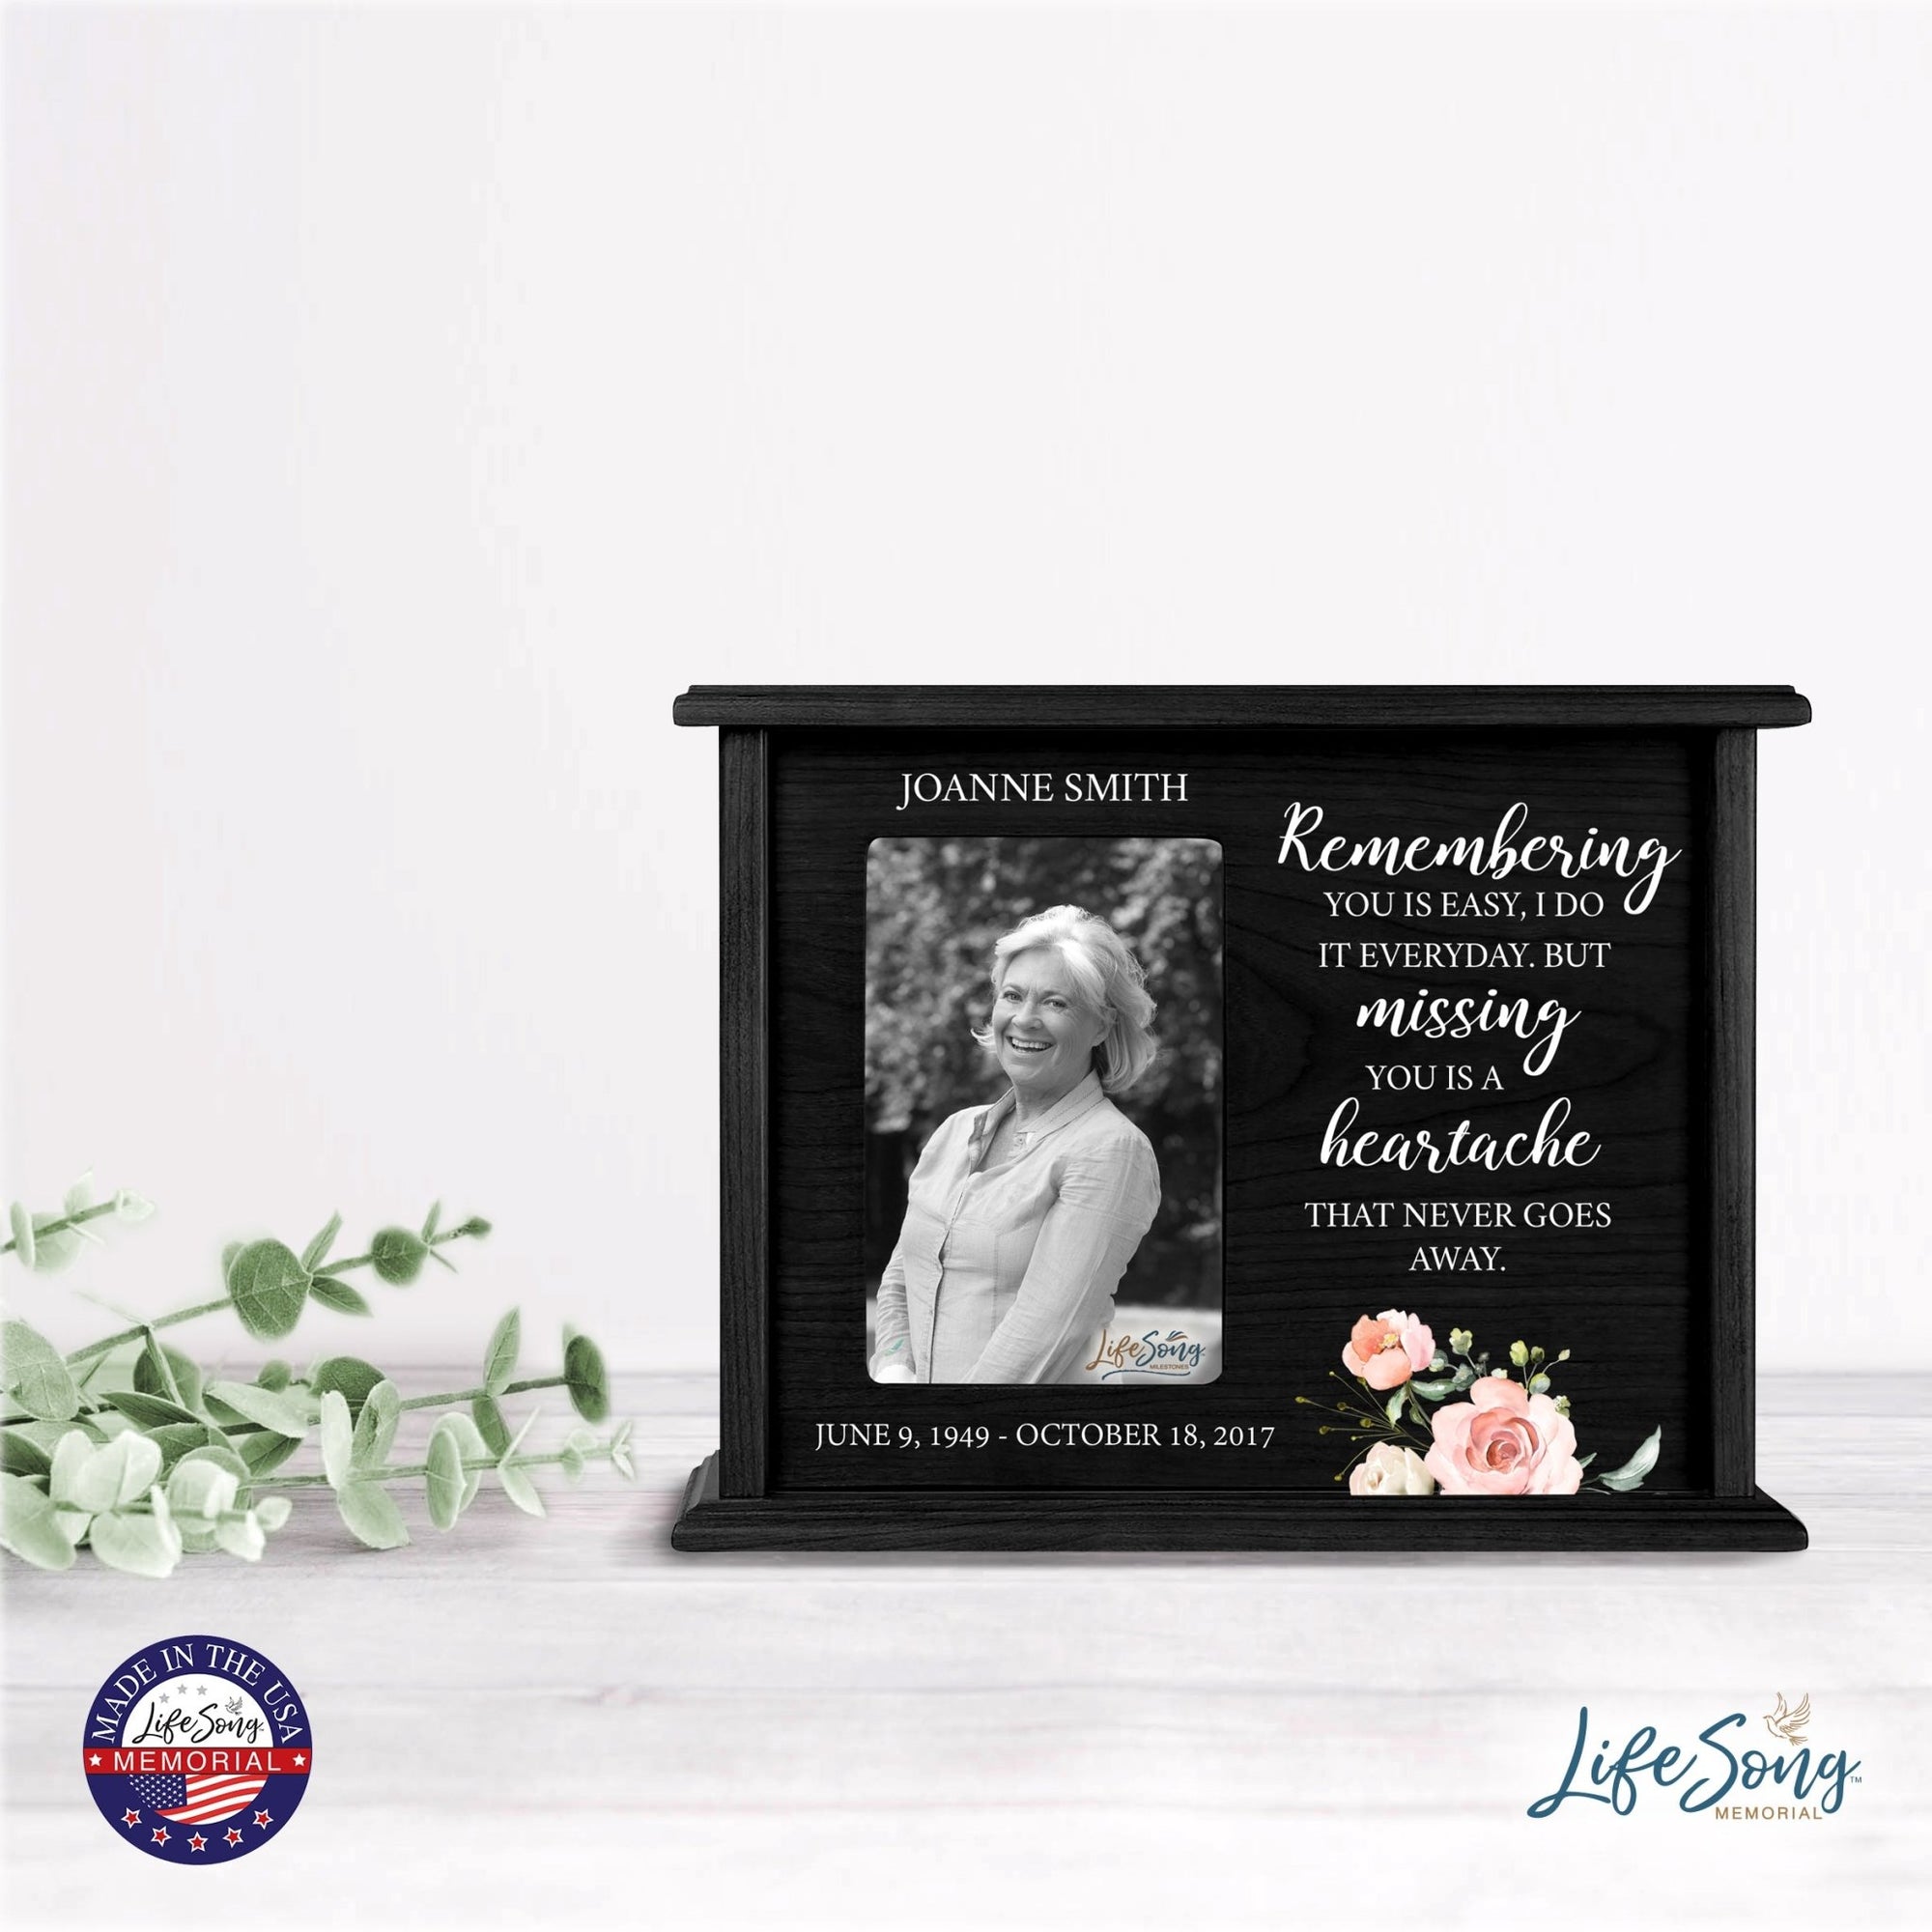 Personalized Memorial Cherry Wood 12 x 4.5 x 9 Cremation Urn Box with Picture Frame holds 200 cu in of Human Ashes and 4x6 Photo - Remembering You Is Easy - LifeSong Milestones